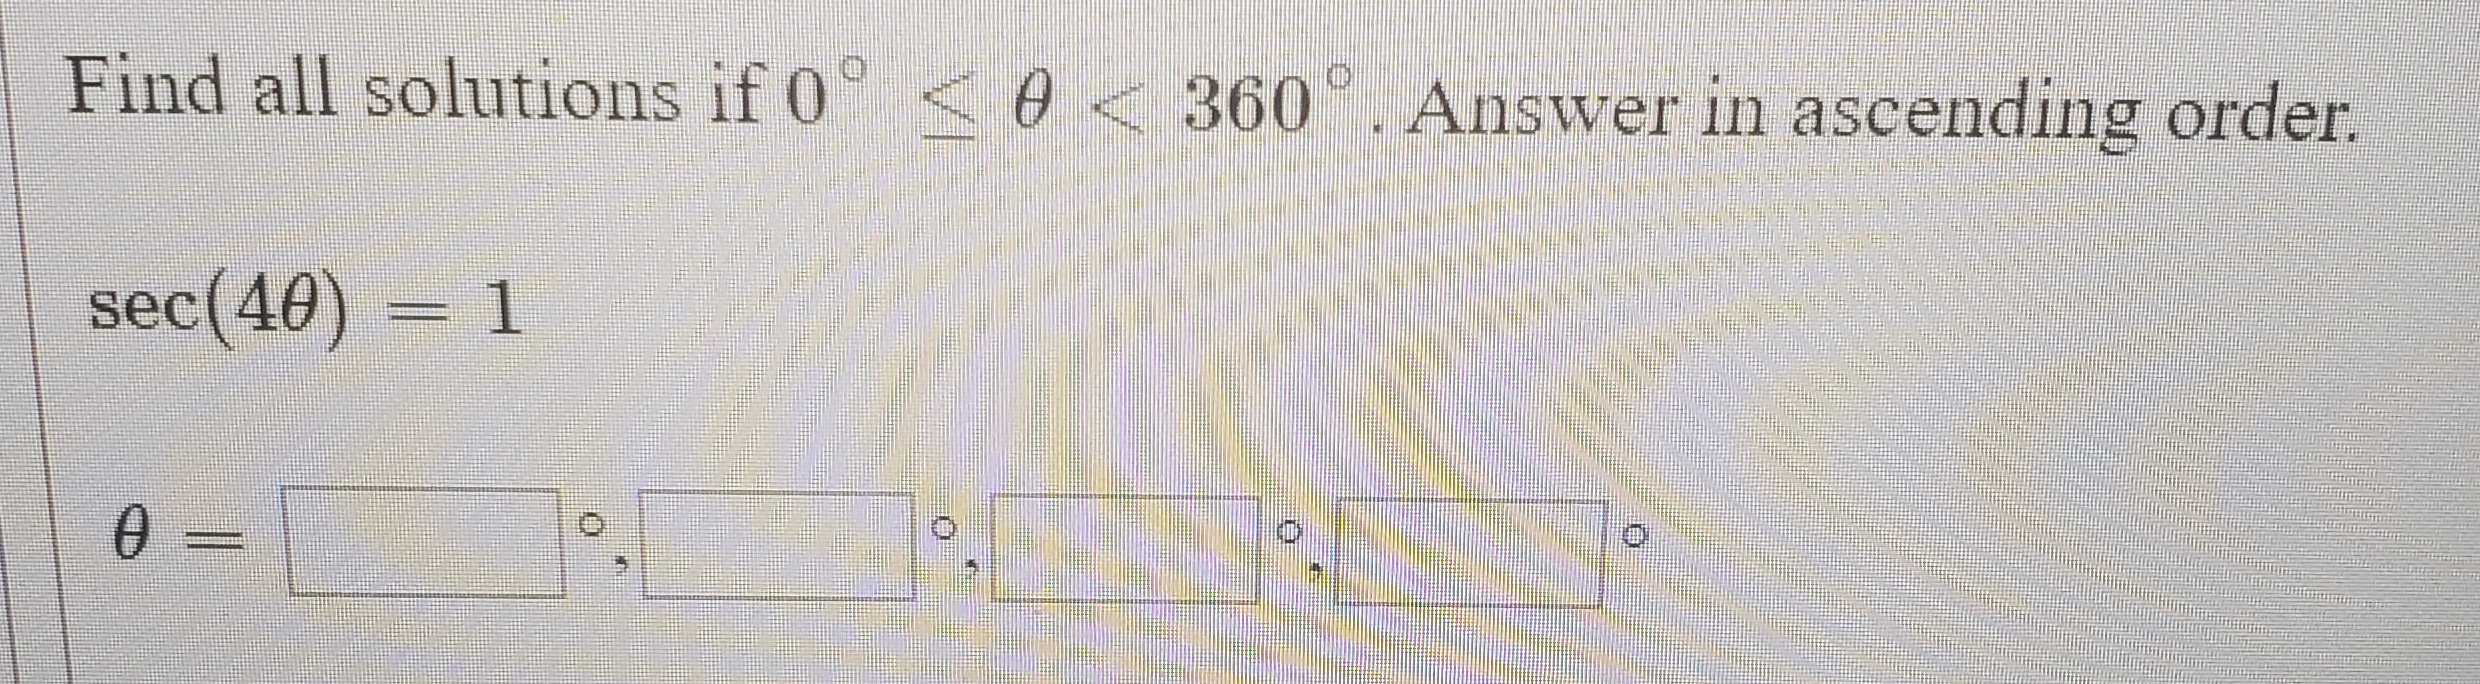 Find all solutions if 0° <0< 360°. Answer in ascending order.
sec(40) = 1
